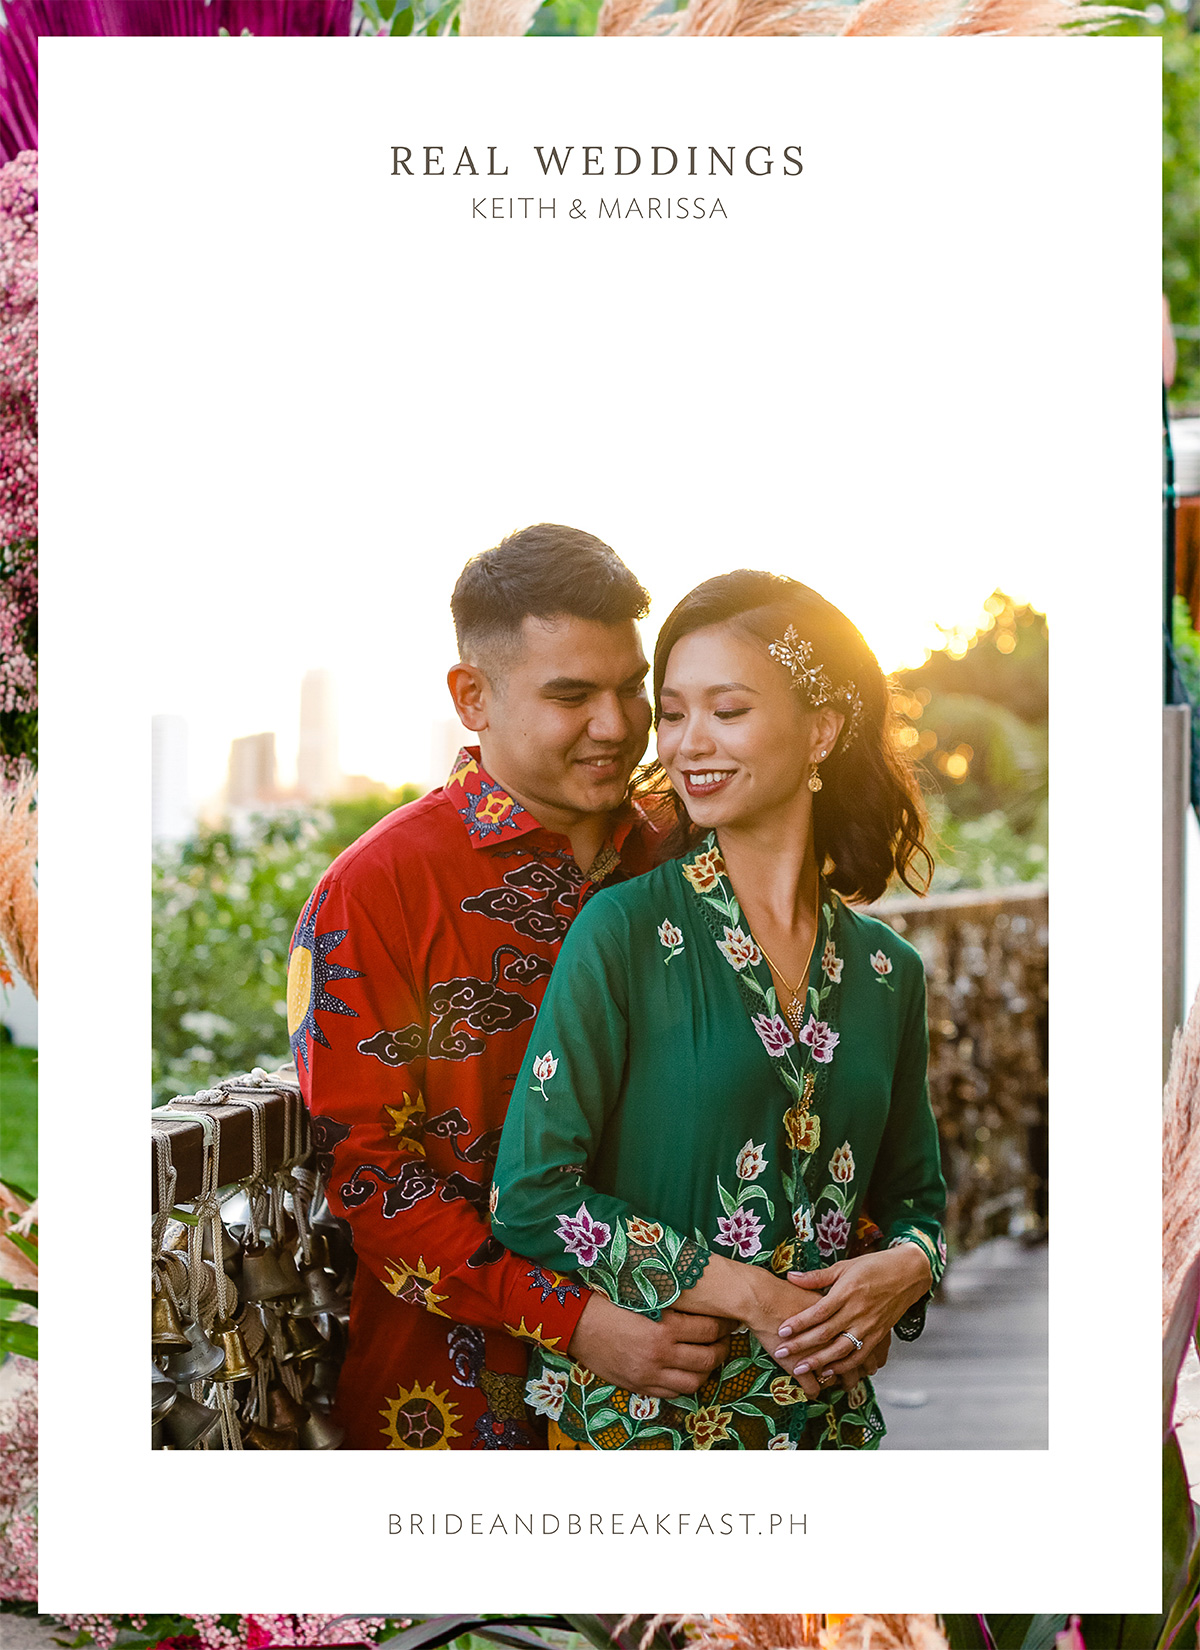 You'll Love the Stylish Dresses and Colorful Florals in this Singapore Wedding!